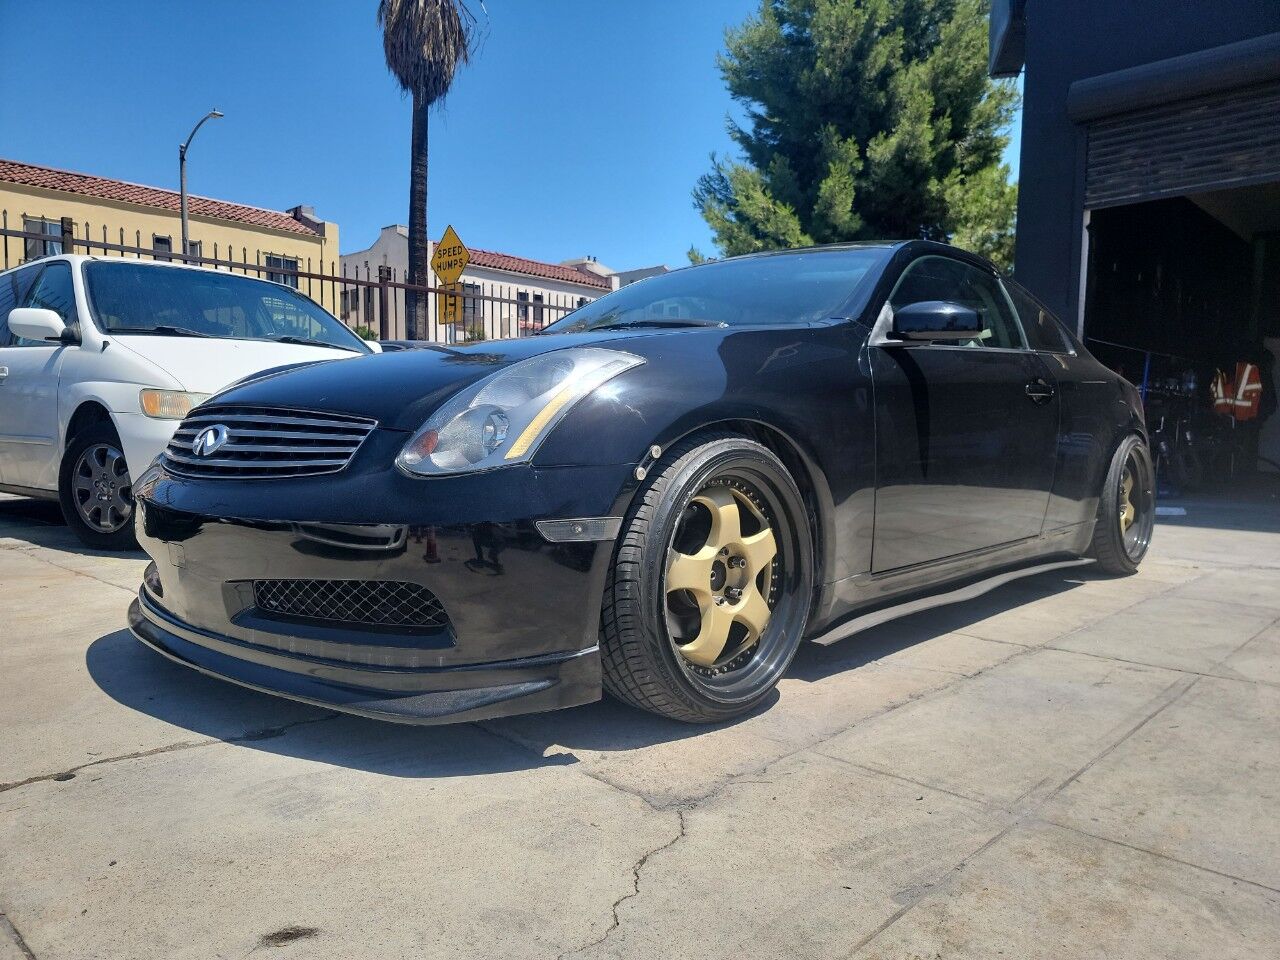 Preowned 2003 INFINITI G35 Base 2dr Coupe for sale by United Automotive Network in Los Angeles, CA